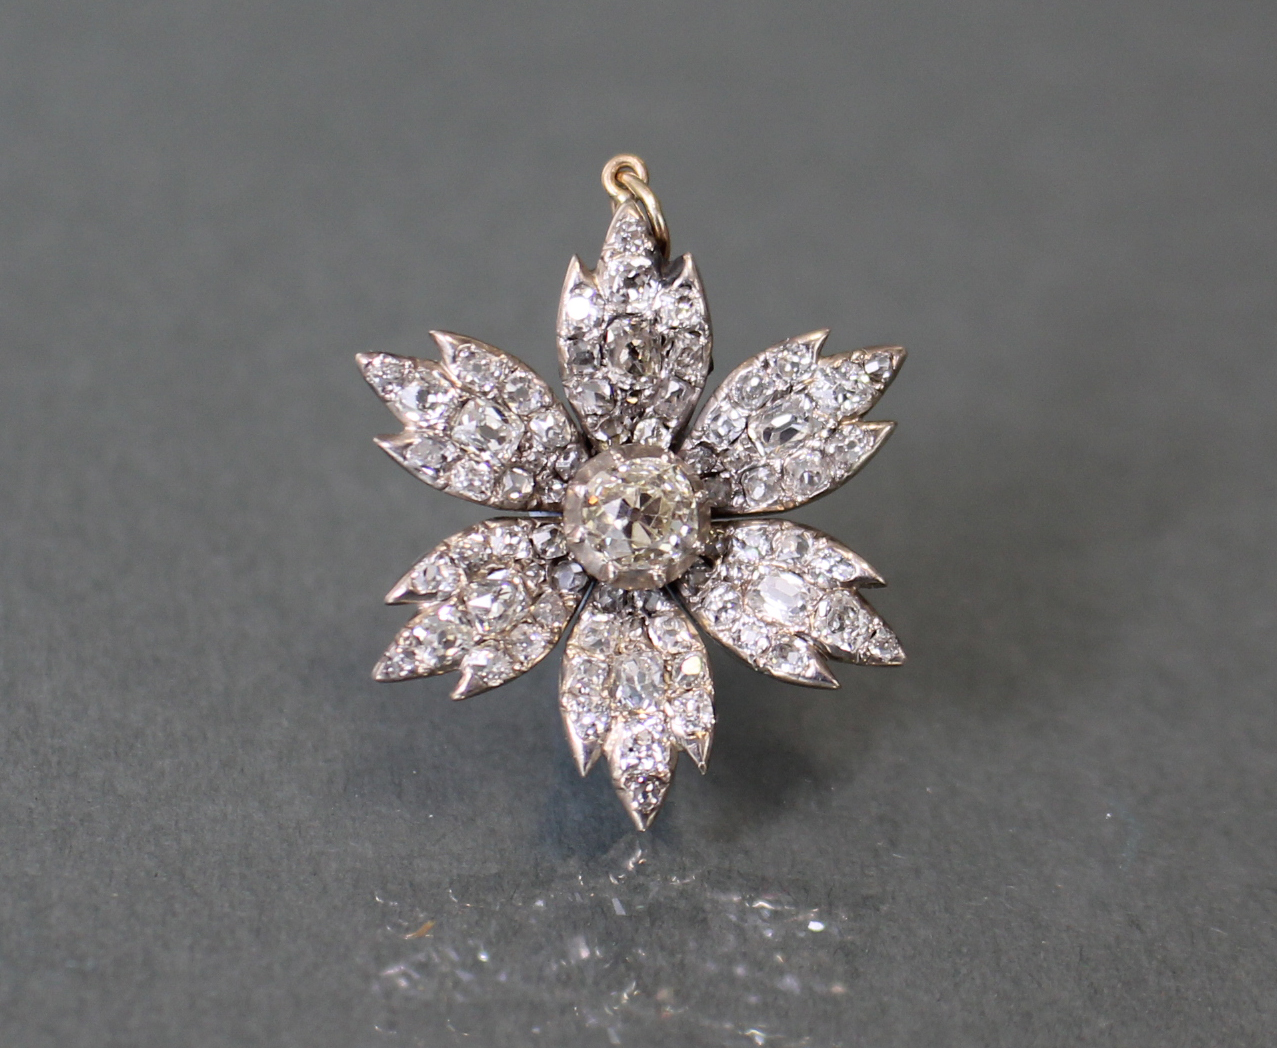 A DIAMOND FLOWER-HEAD PENDANT, the centre stone approximately 0.5 carat, surrounded by six petals